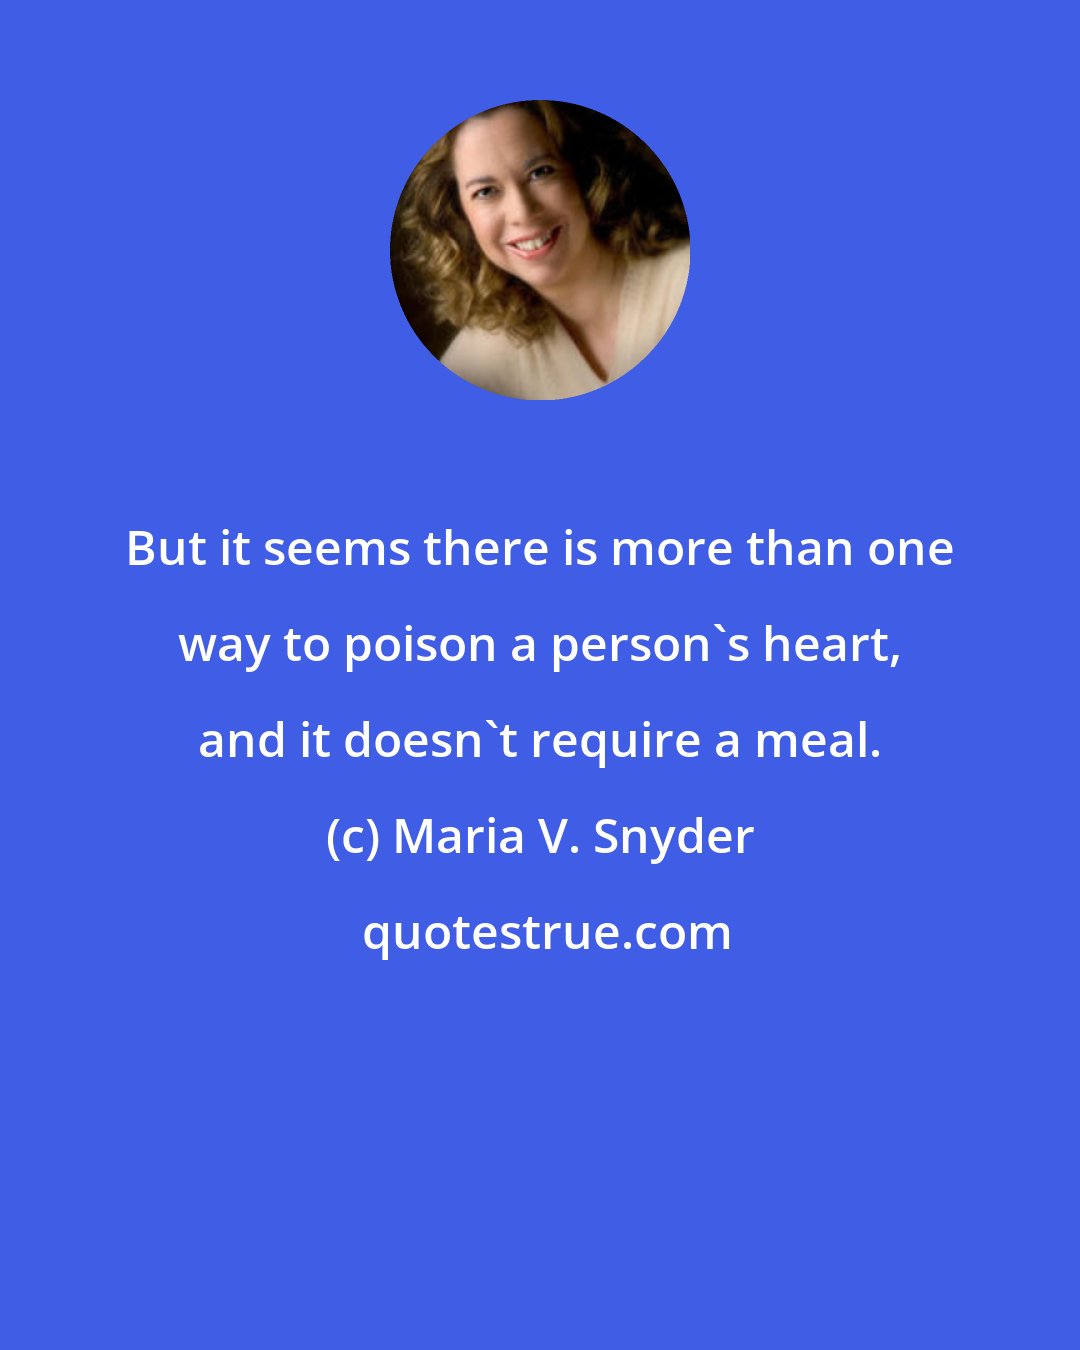 Maria V. Snyder: But it seems there is more than one way to poison a person's heart, and it doesn't require a meal.